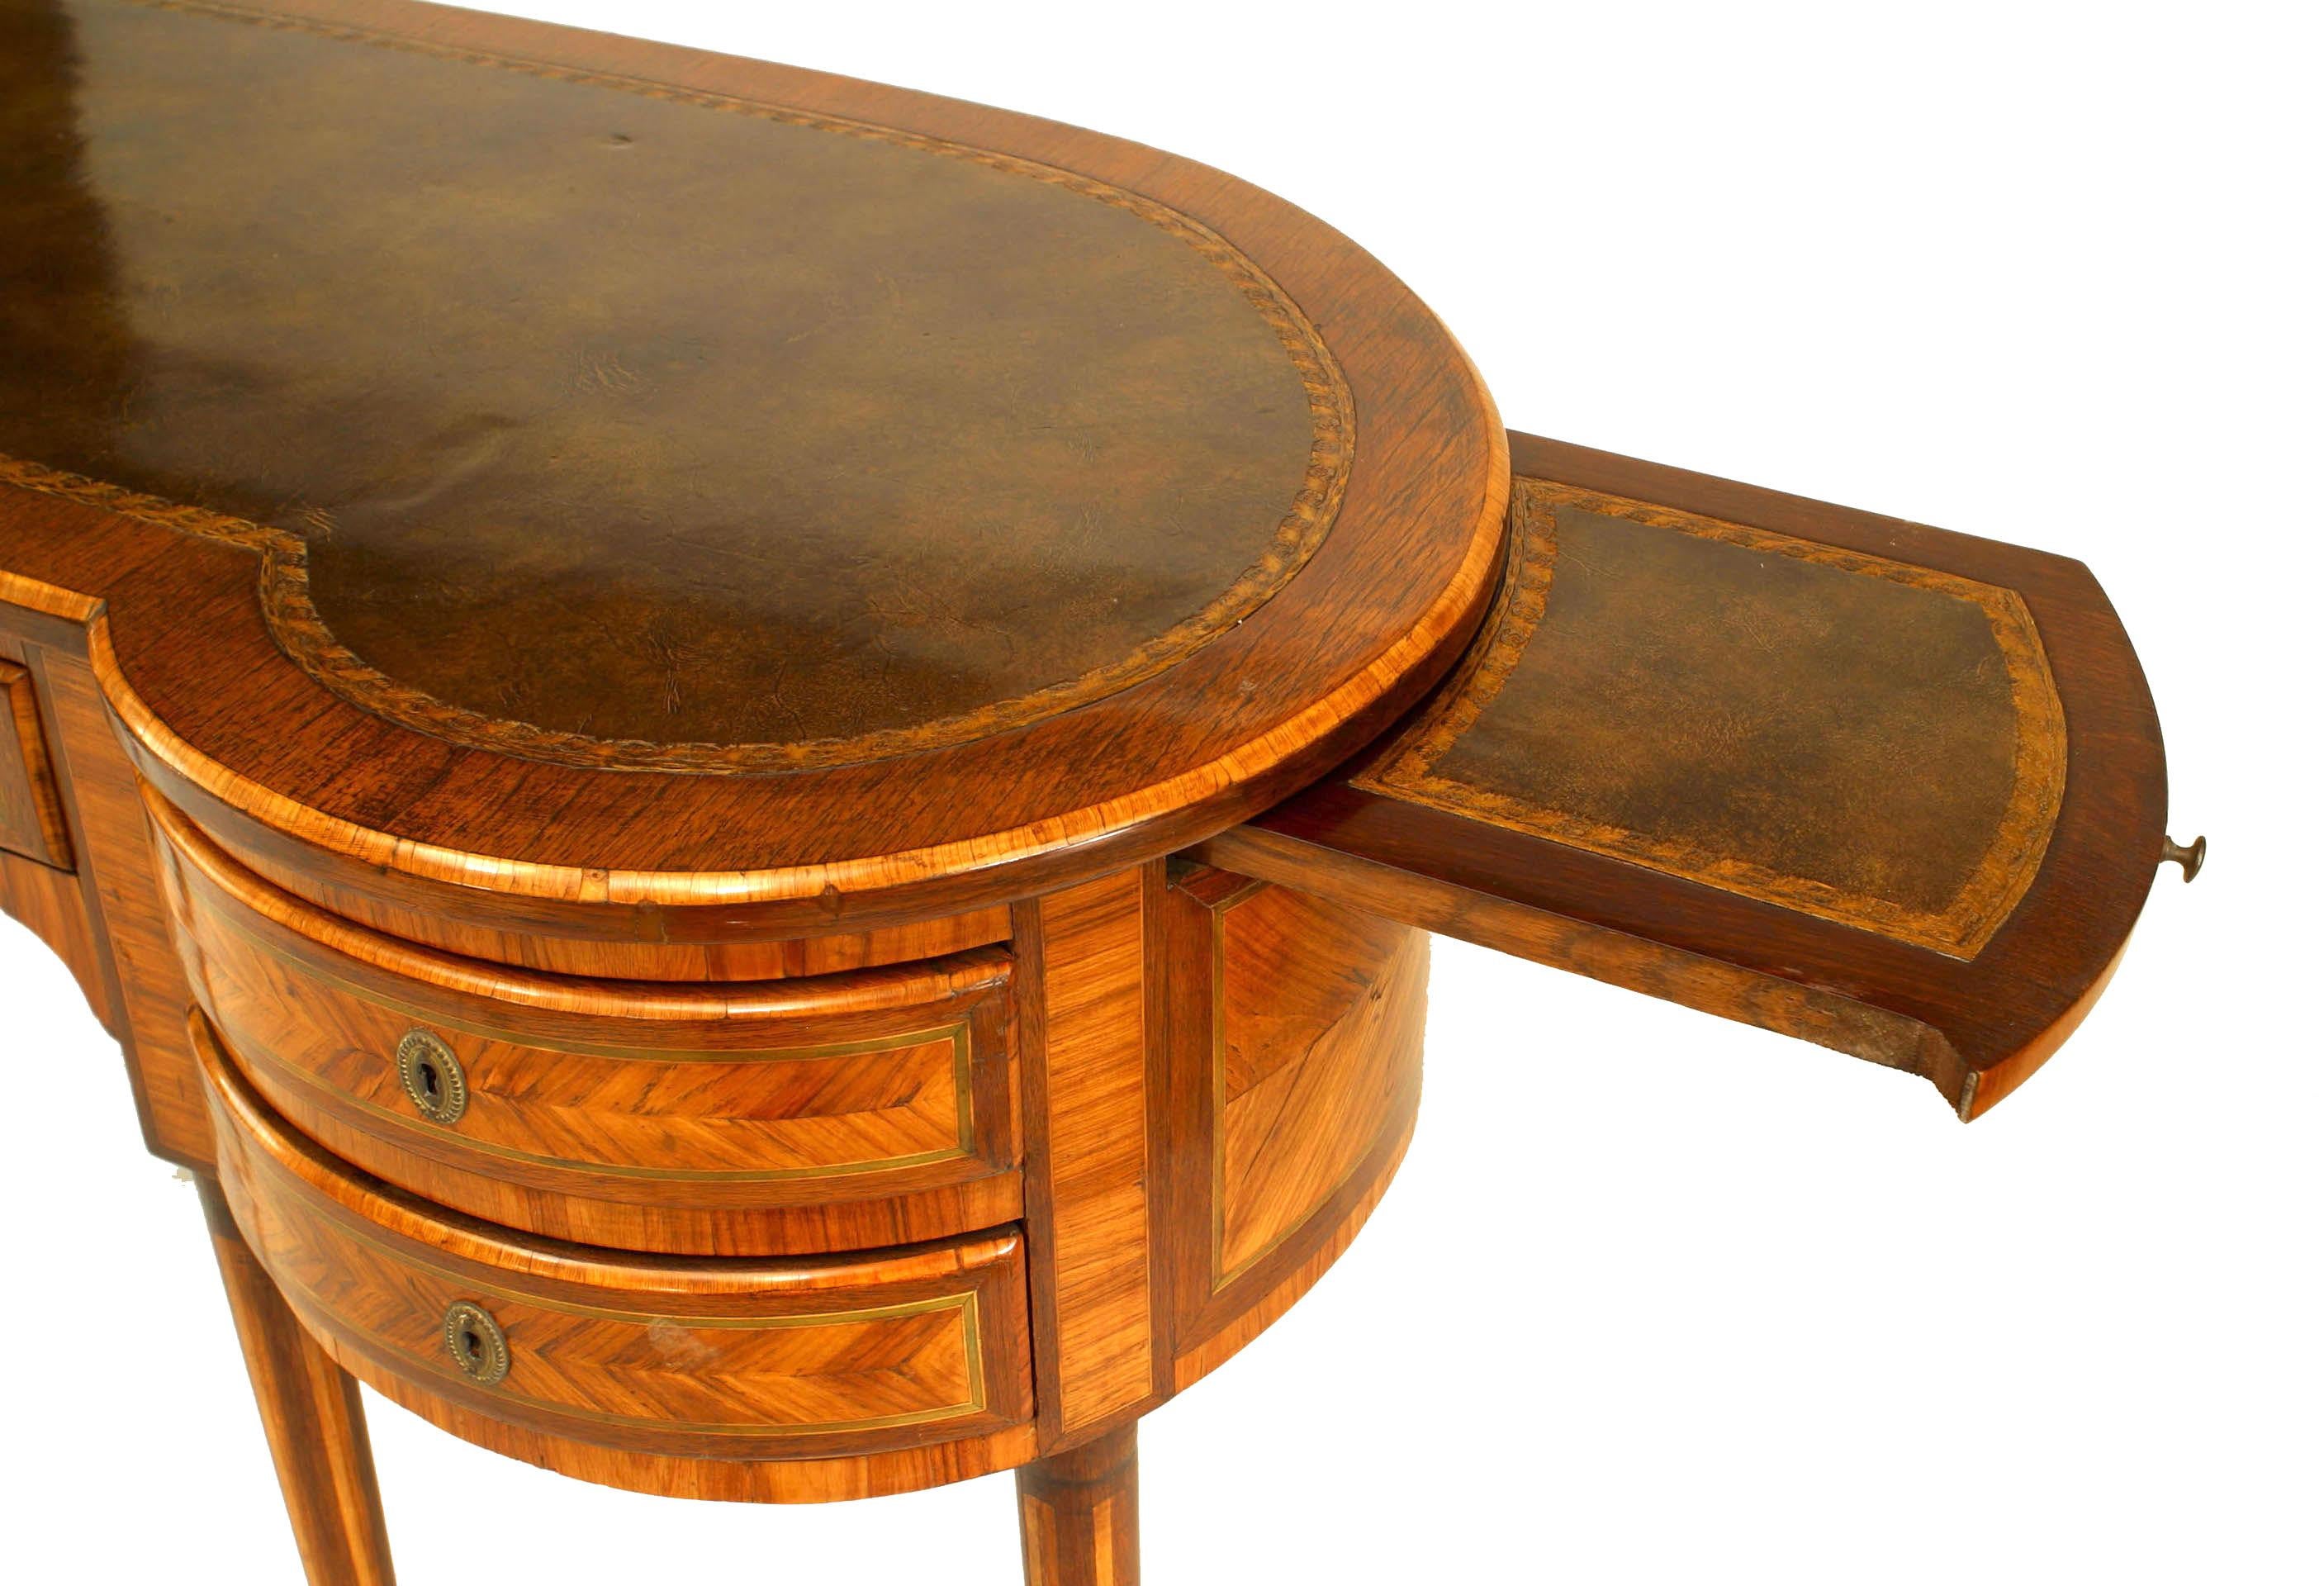 French Louis XVI Style Satinwood and Inlaid Kidney Desk For Sale 4